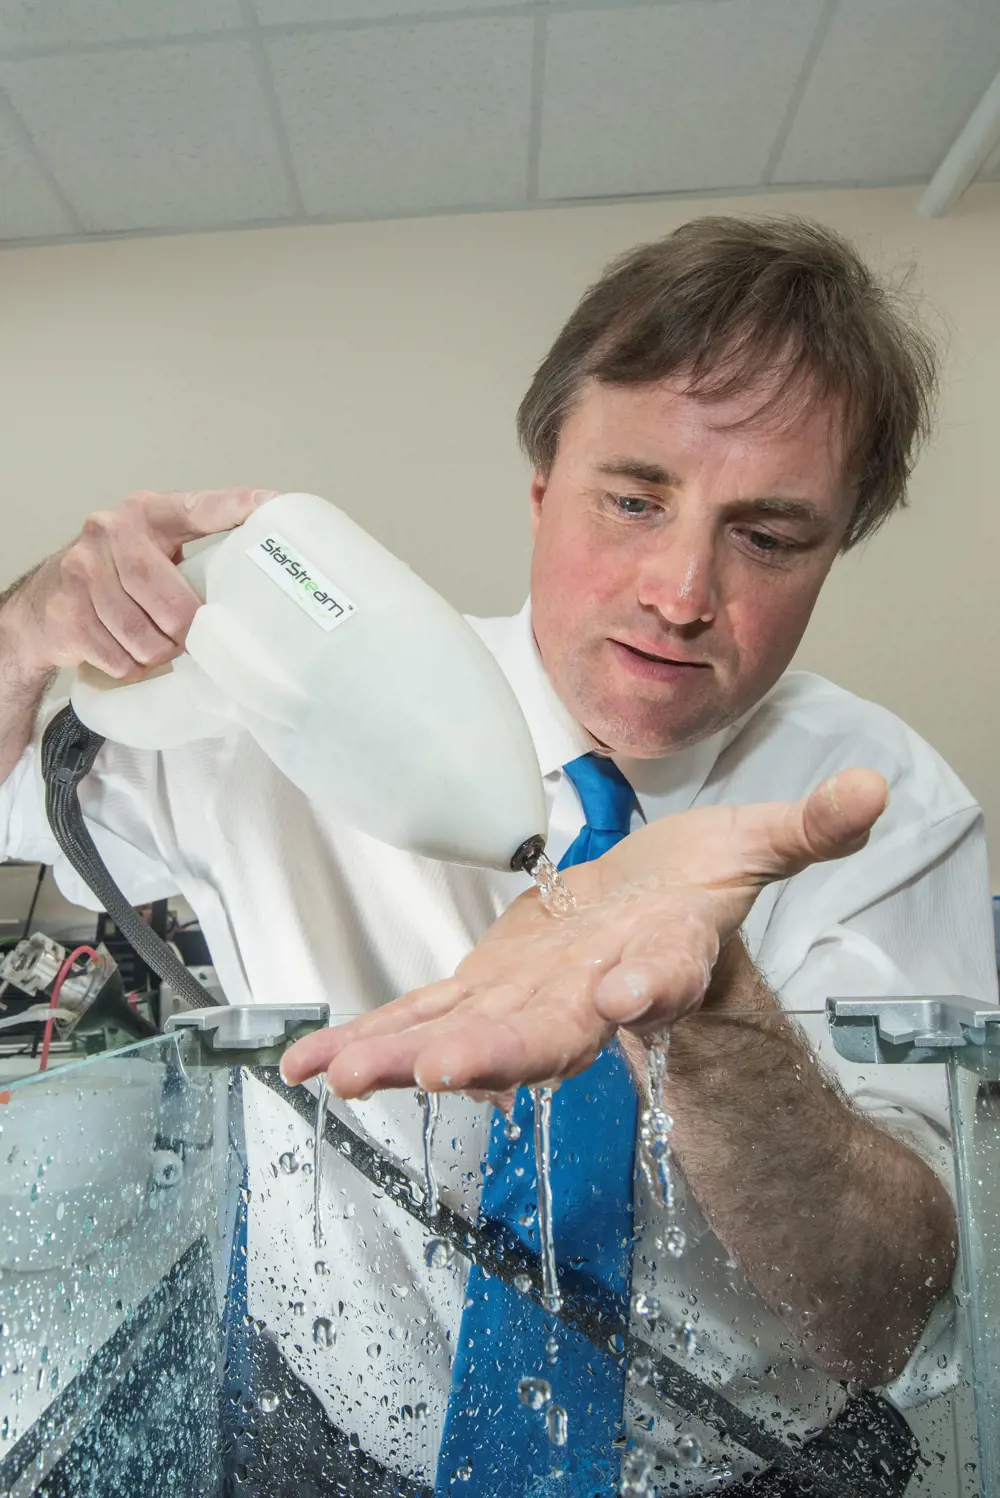 Professor Timothy Leighton using the StarStream device on the open palm of his hand, where the device is letting out clear liquid that is running over his hand. 